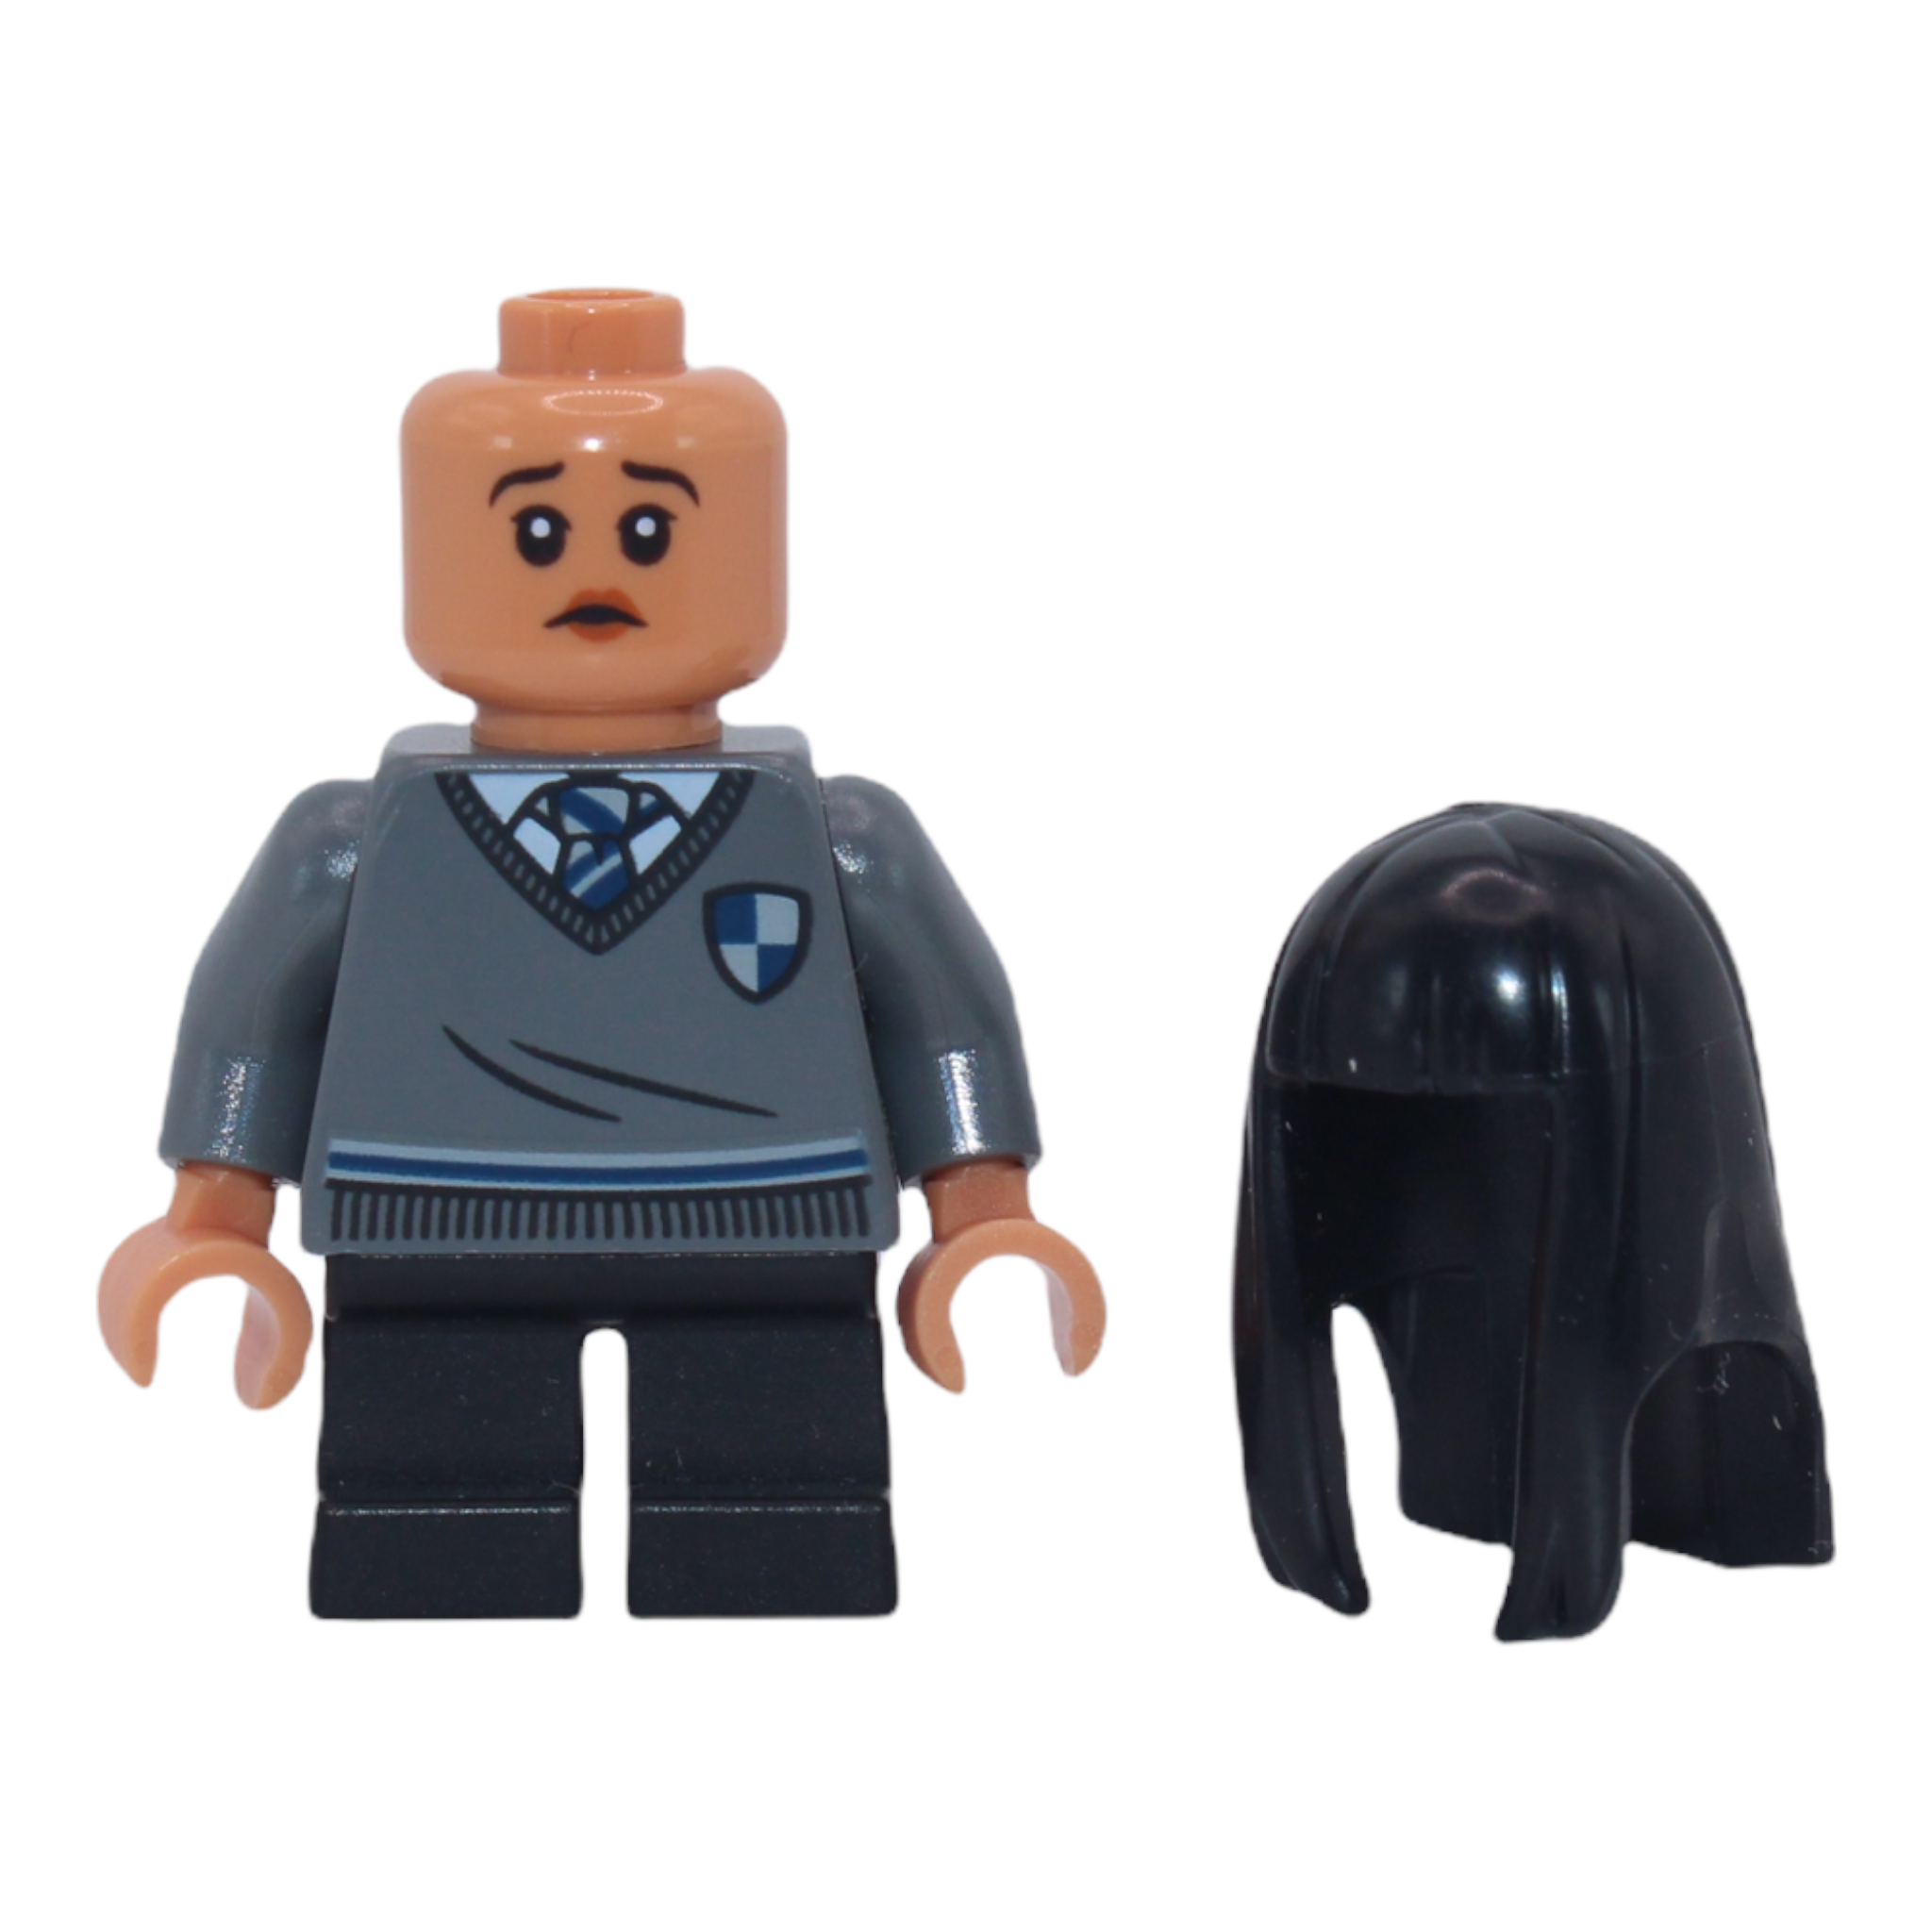 Cho Chang (Ravenclaw sweater with crest)